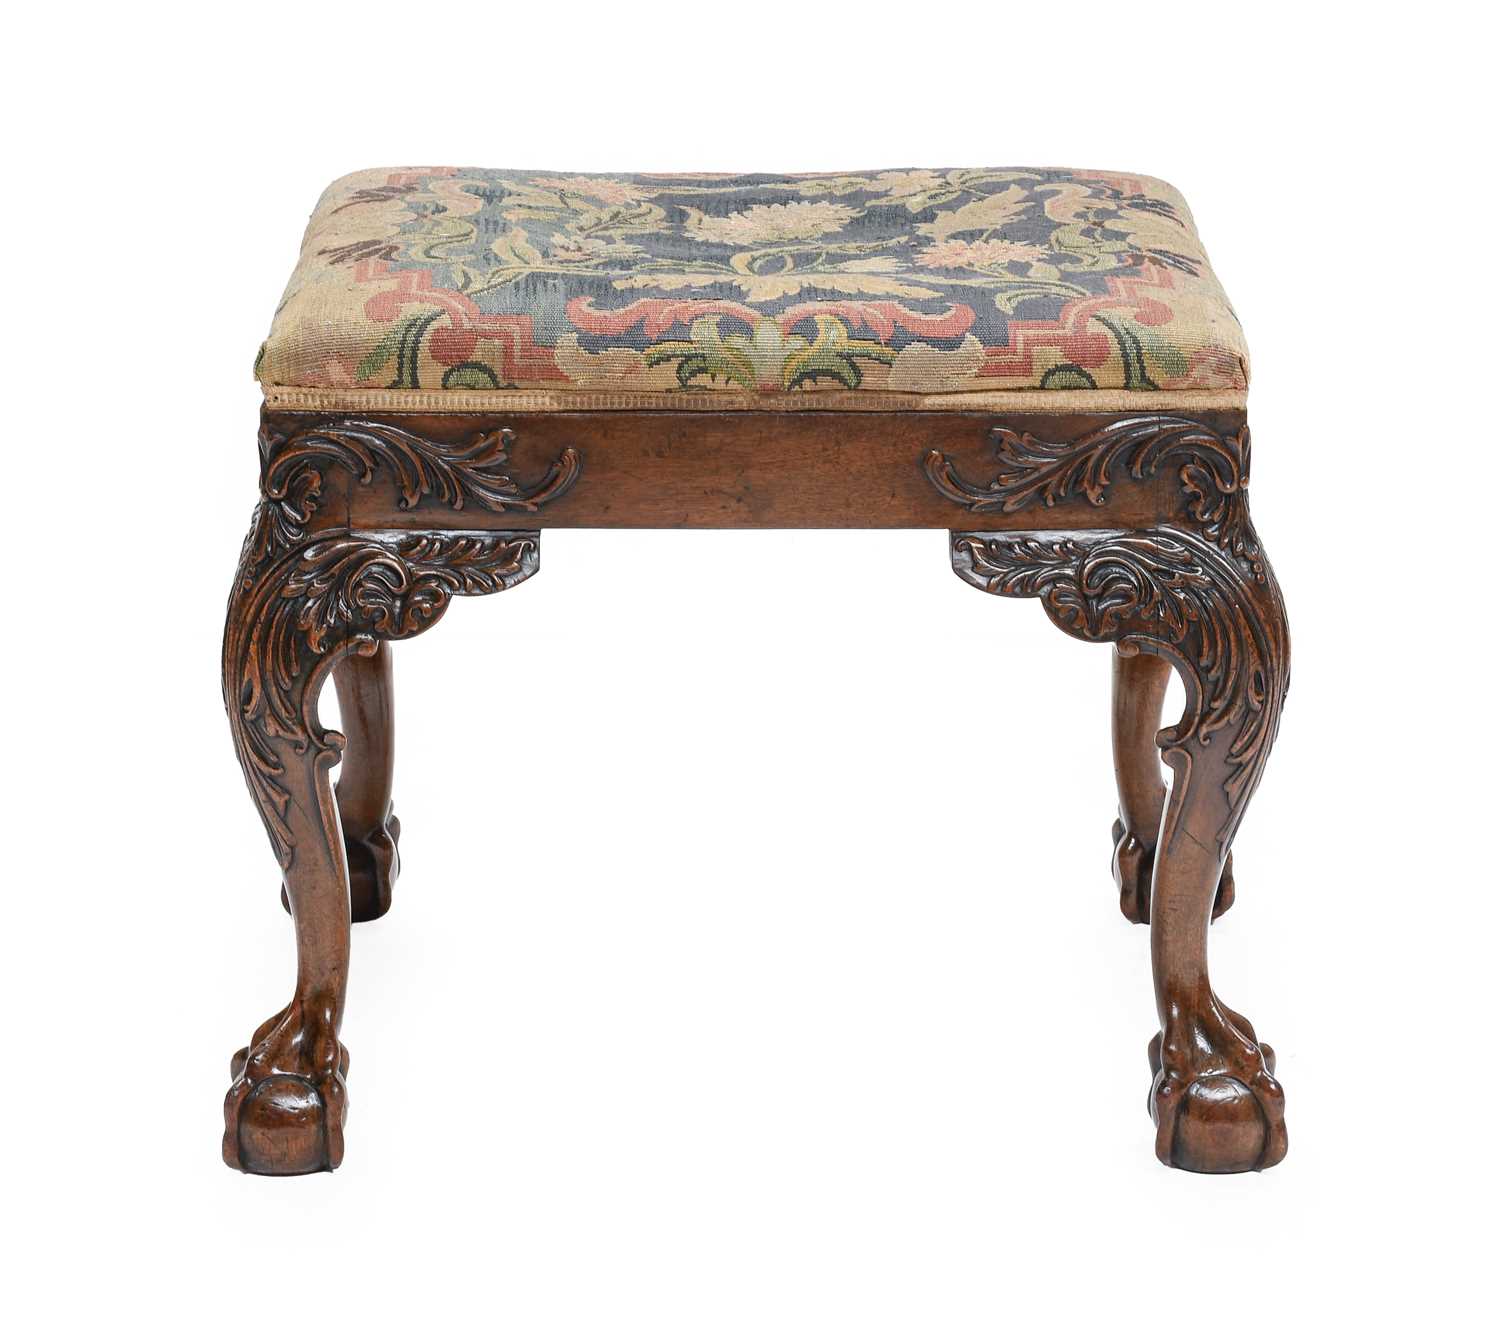 A George III Carved Mahogany Dressing Stool, late 18th century, covered in floral needlework, with